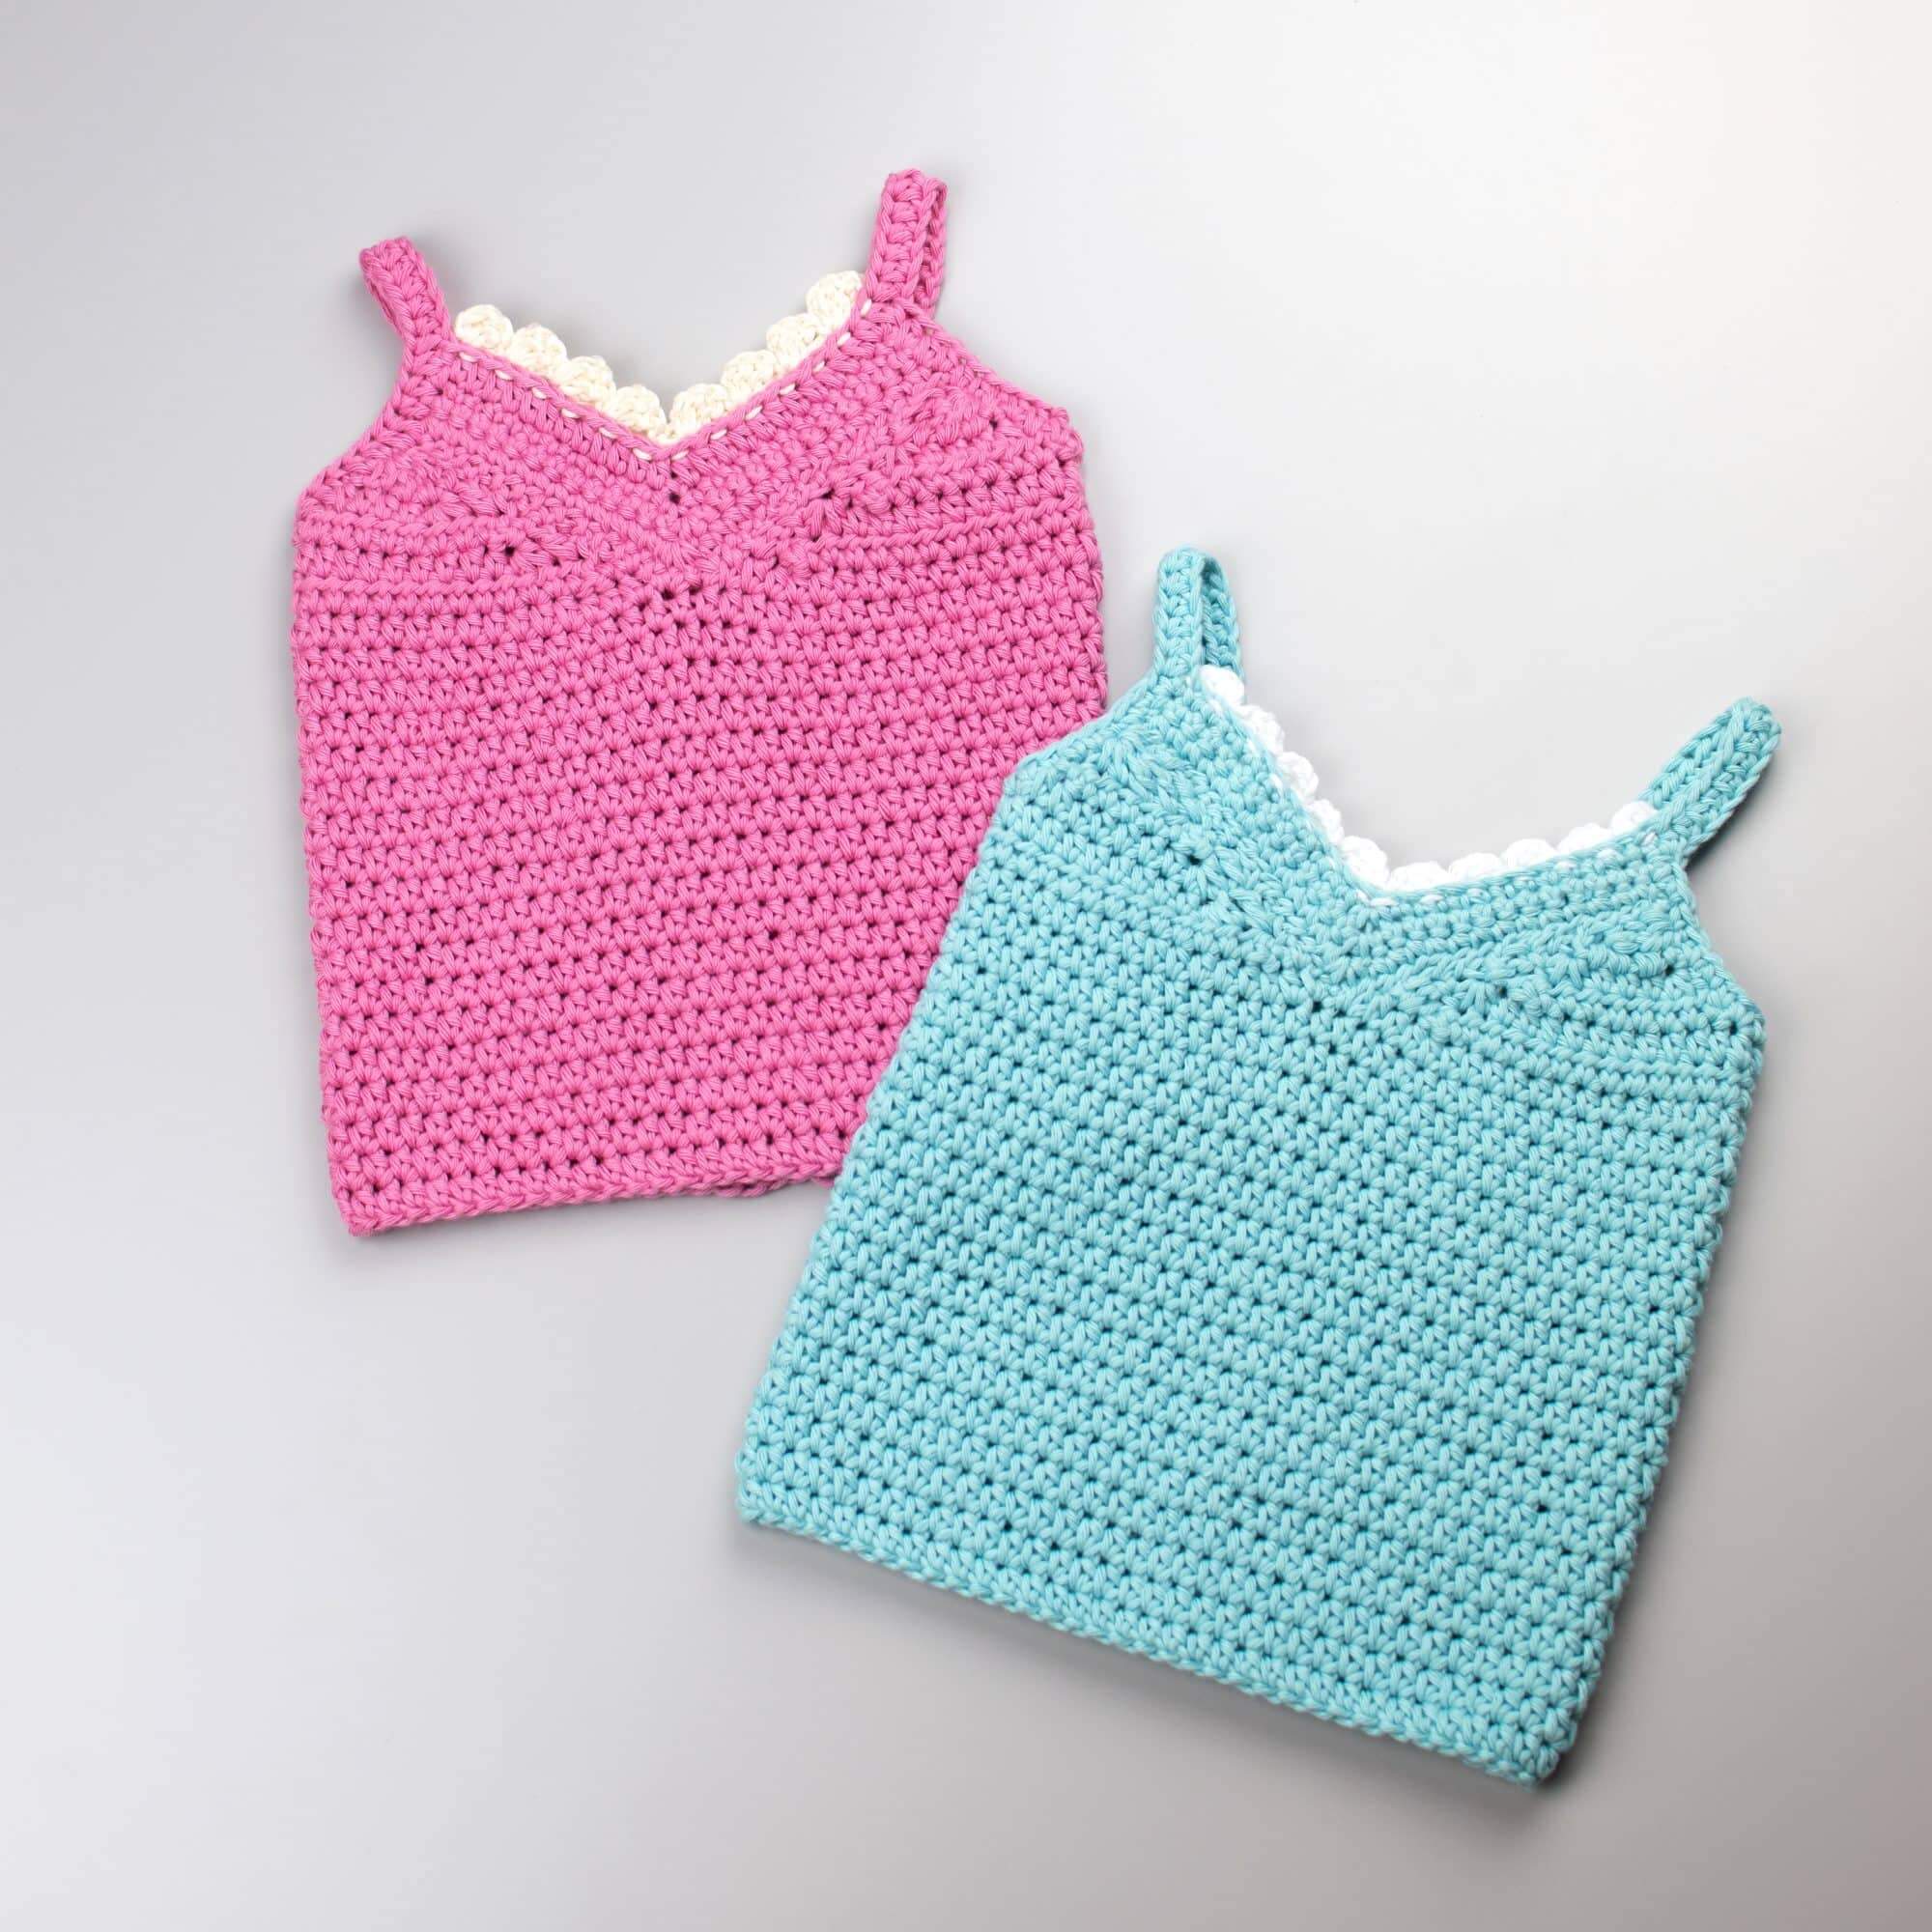 Crochet Baby Top Little Lace Tank Croby Patterns